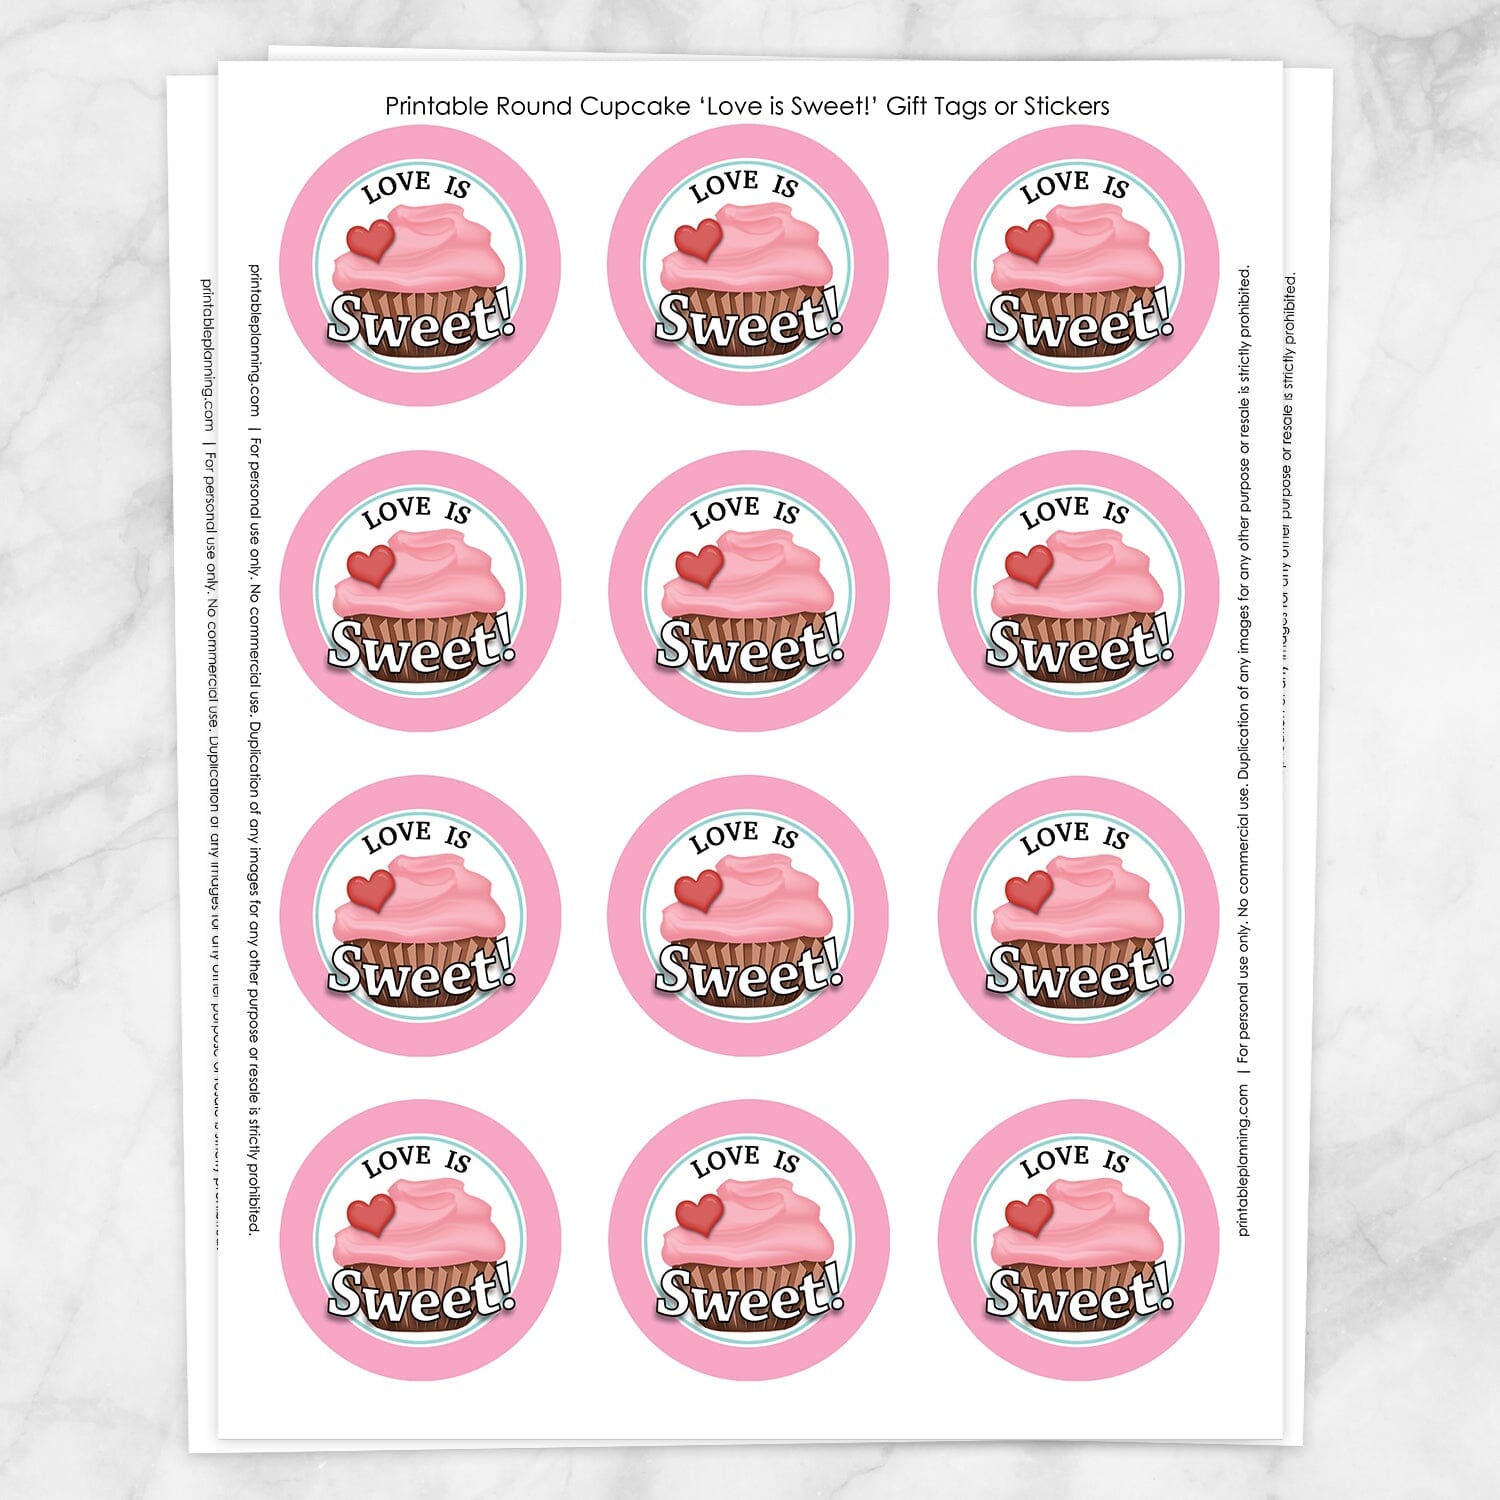 Printable Cupcake "Love is Sweet!" Favor Stickers at Printable Planning. Sheet of 12 stickers.